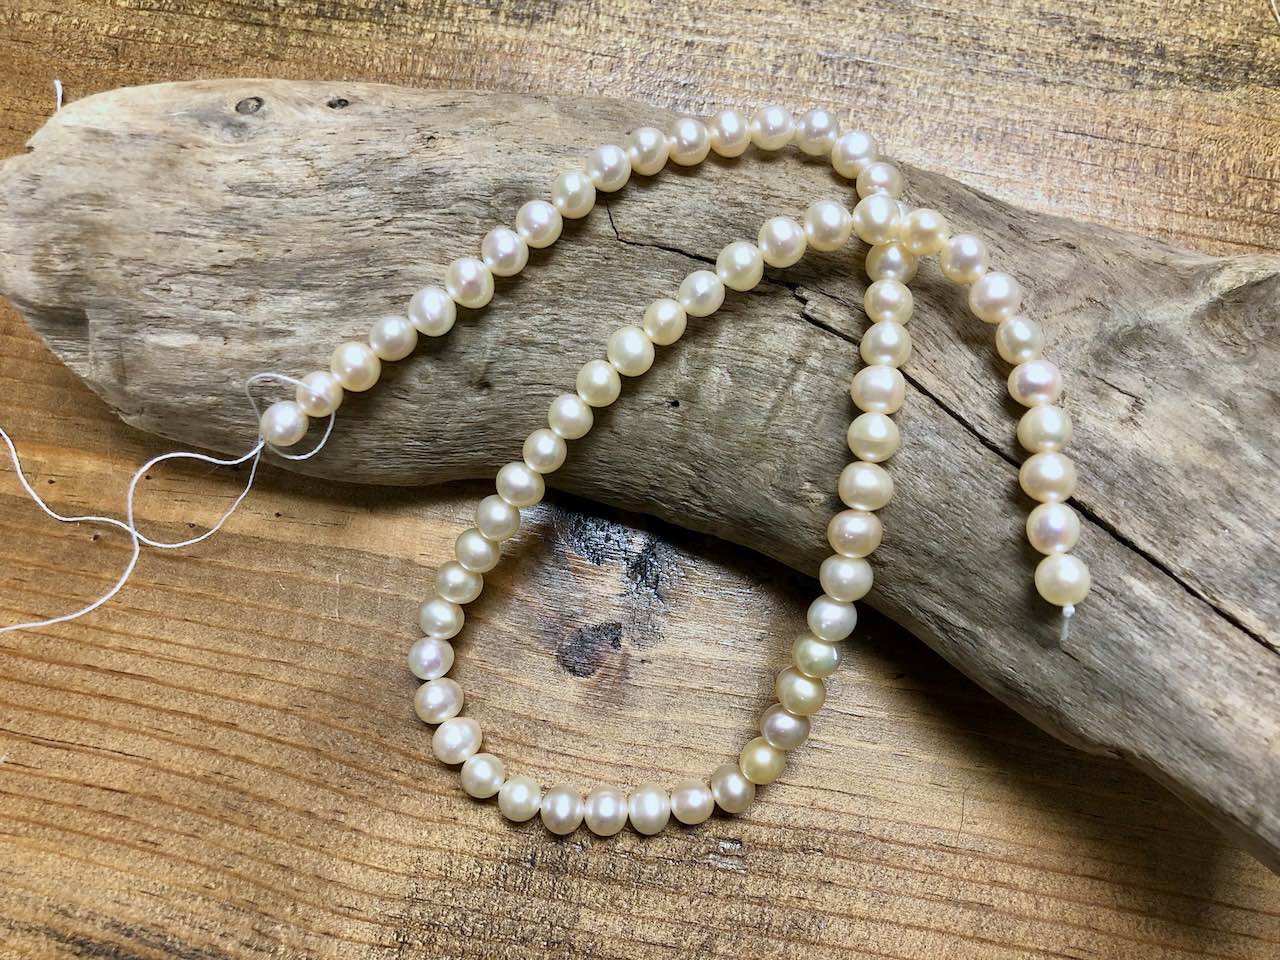 Old-Stock, Vintage Freshwater Pearls - 7mm - 16”